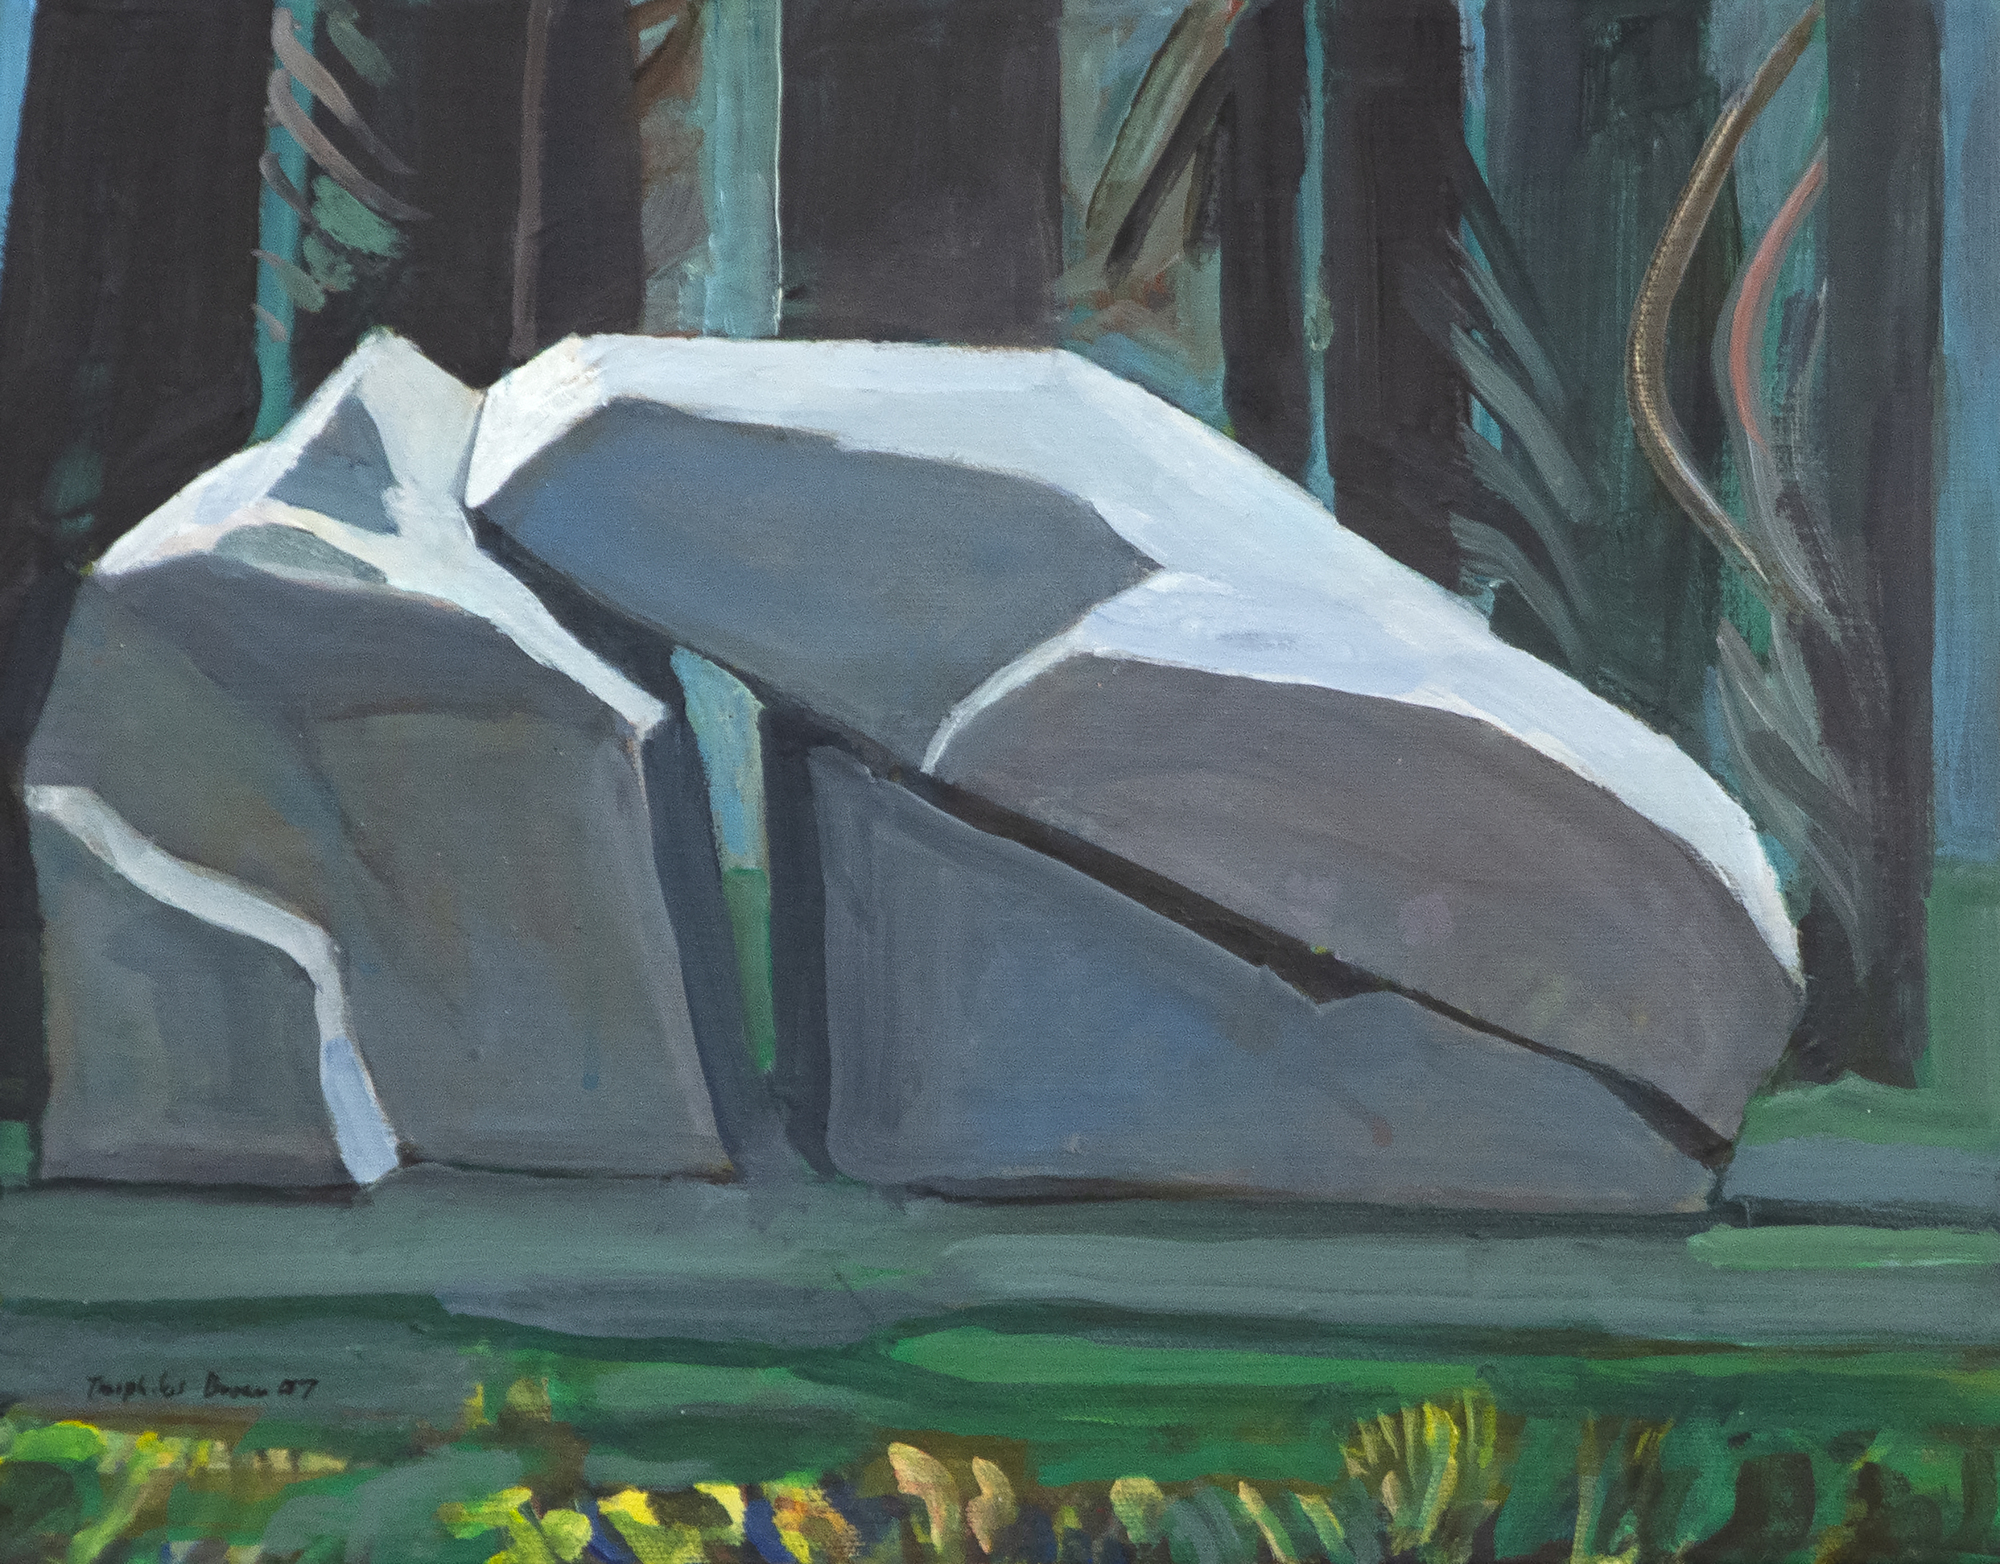 WILLIAM THEOPHILUS BROWN - Split Rock, Cisco Grove - acrylic on canvas - 11 x 14 in.